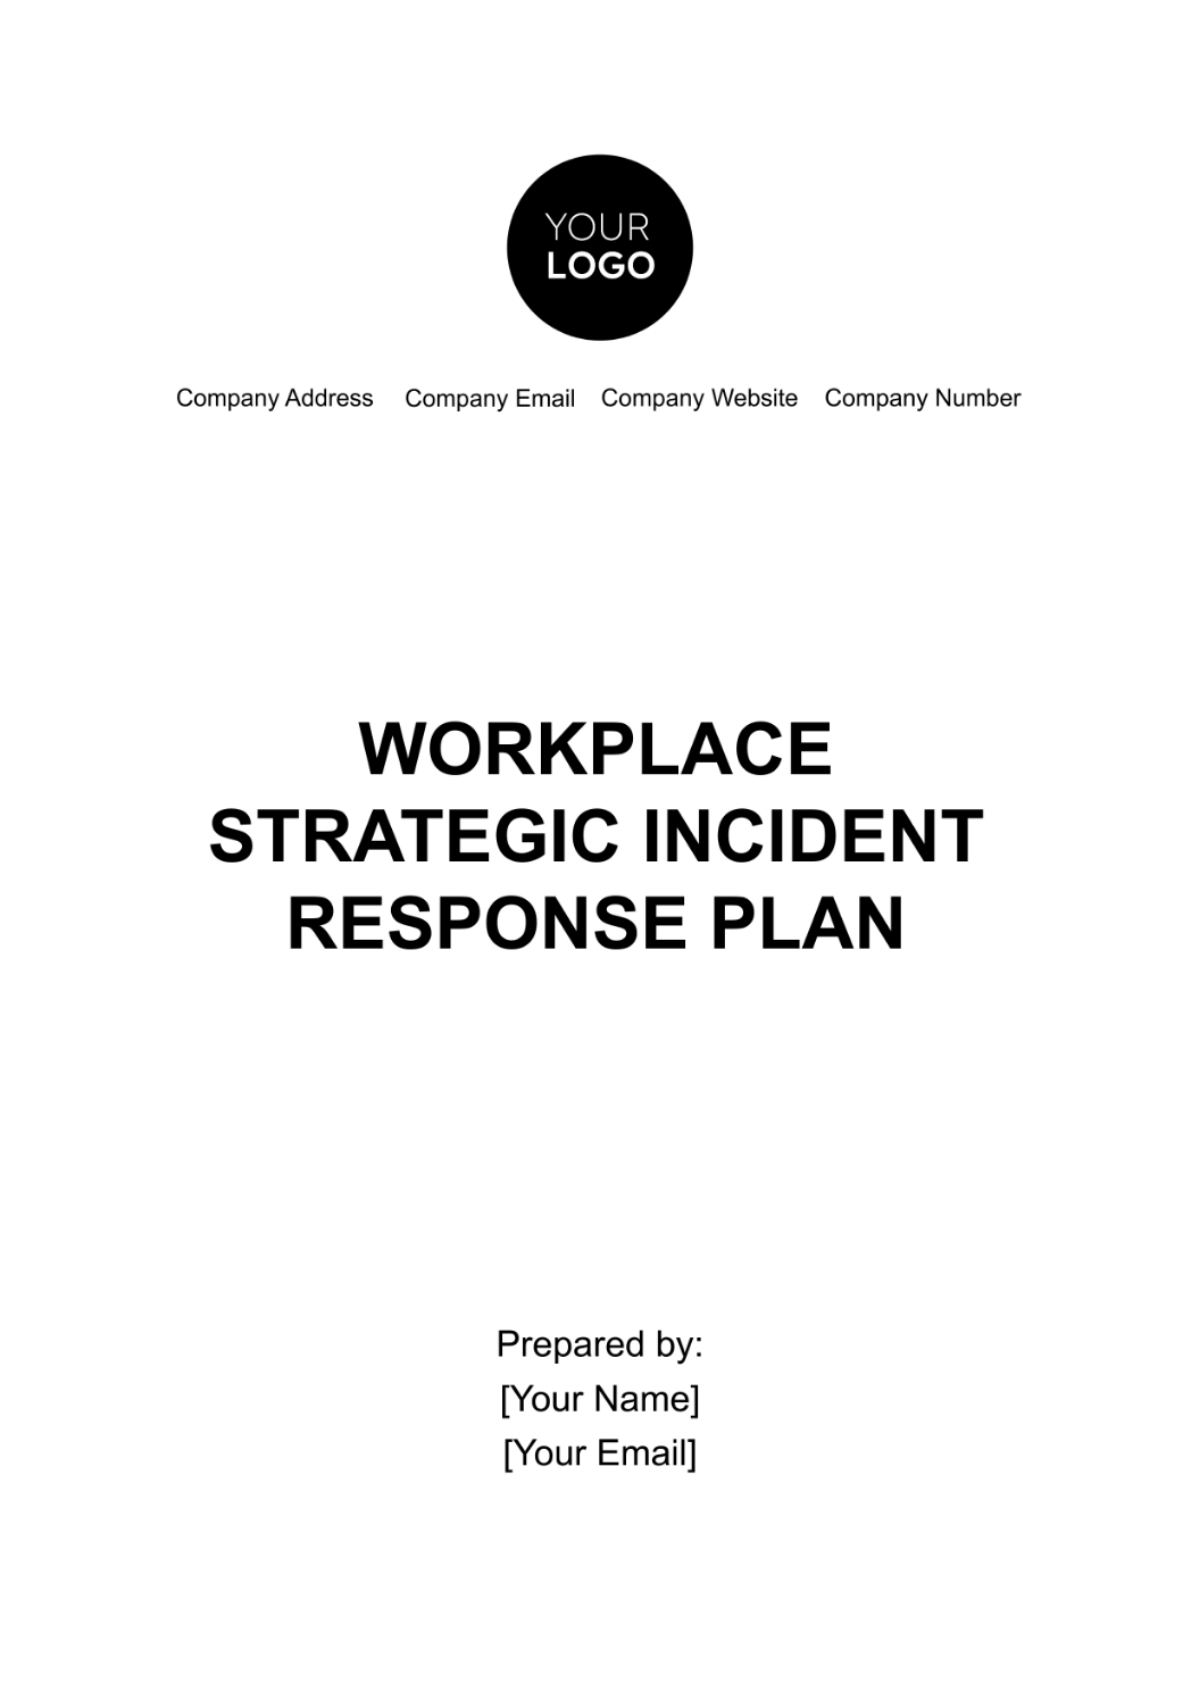 Free Workplace Strategic Incident Response Plan Template